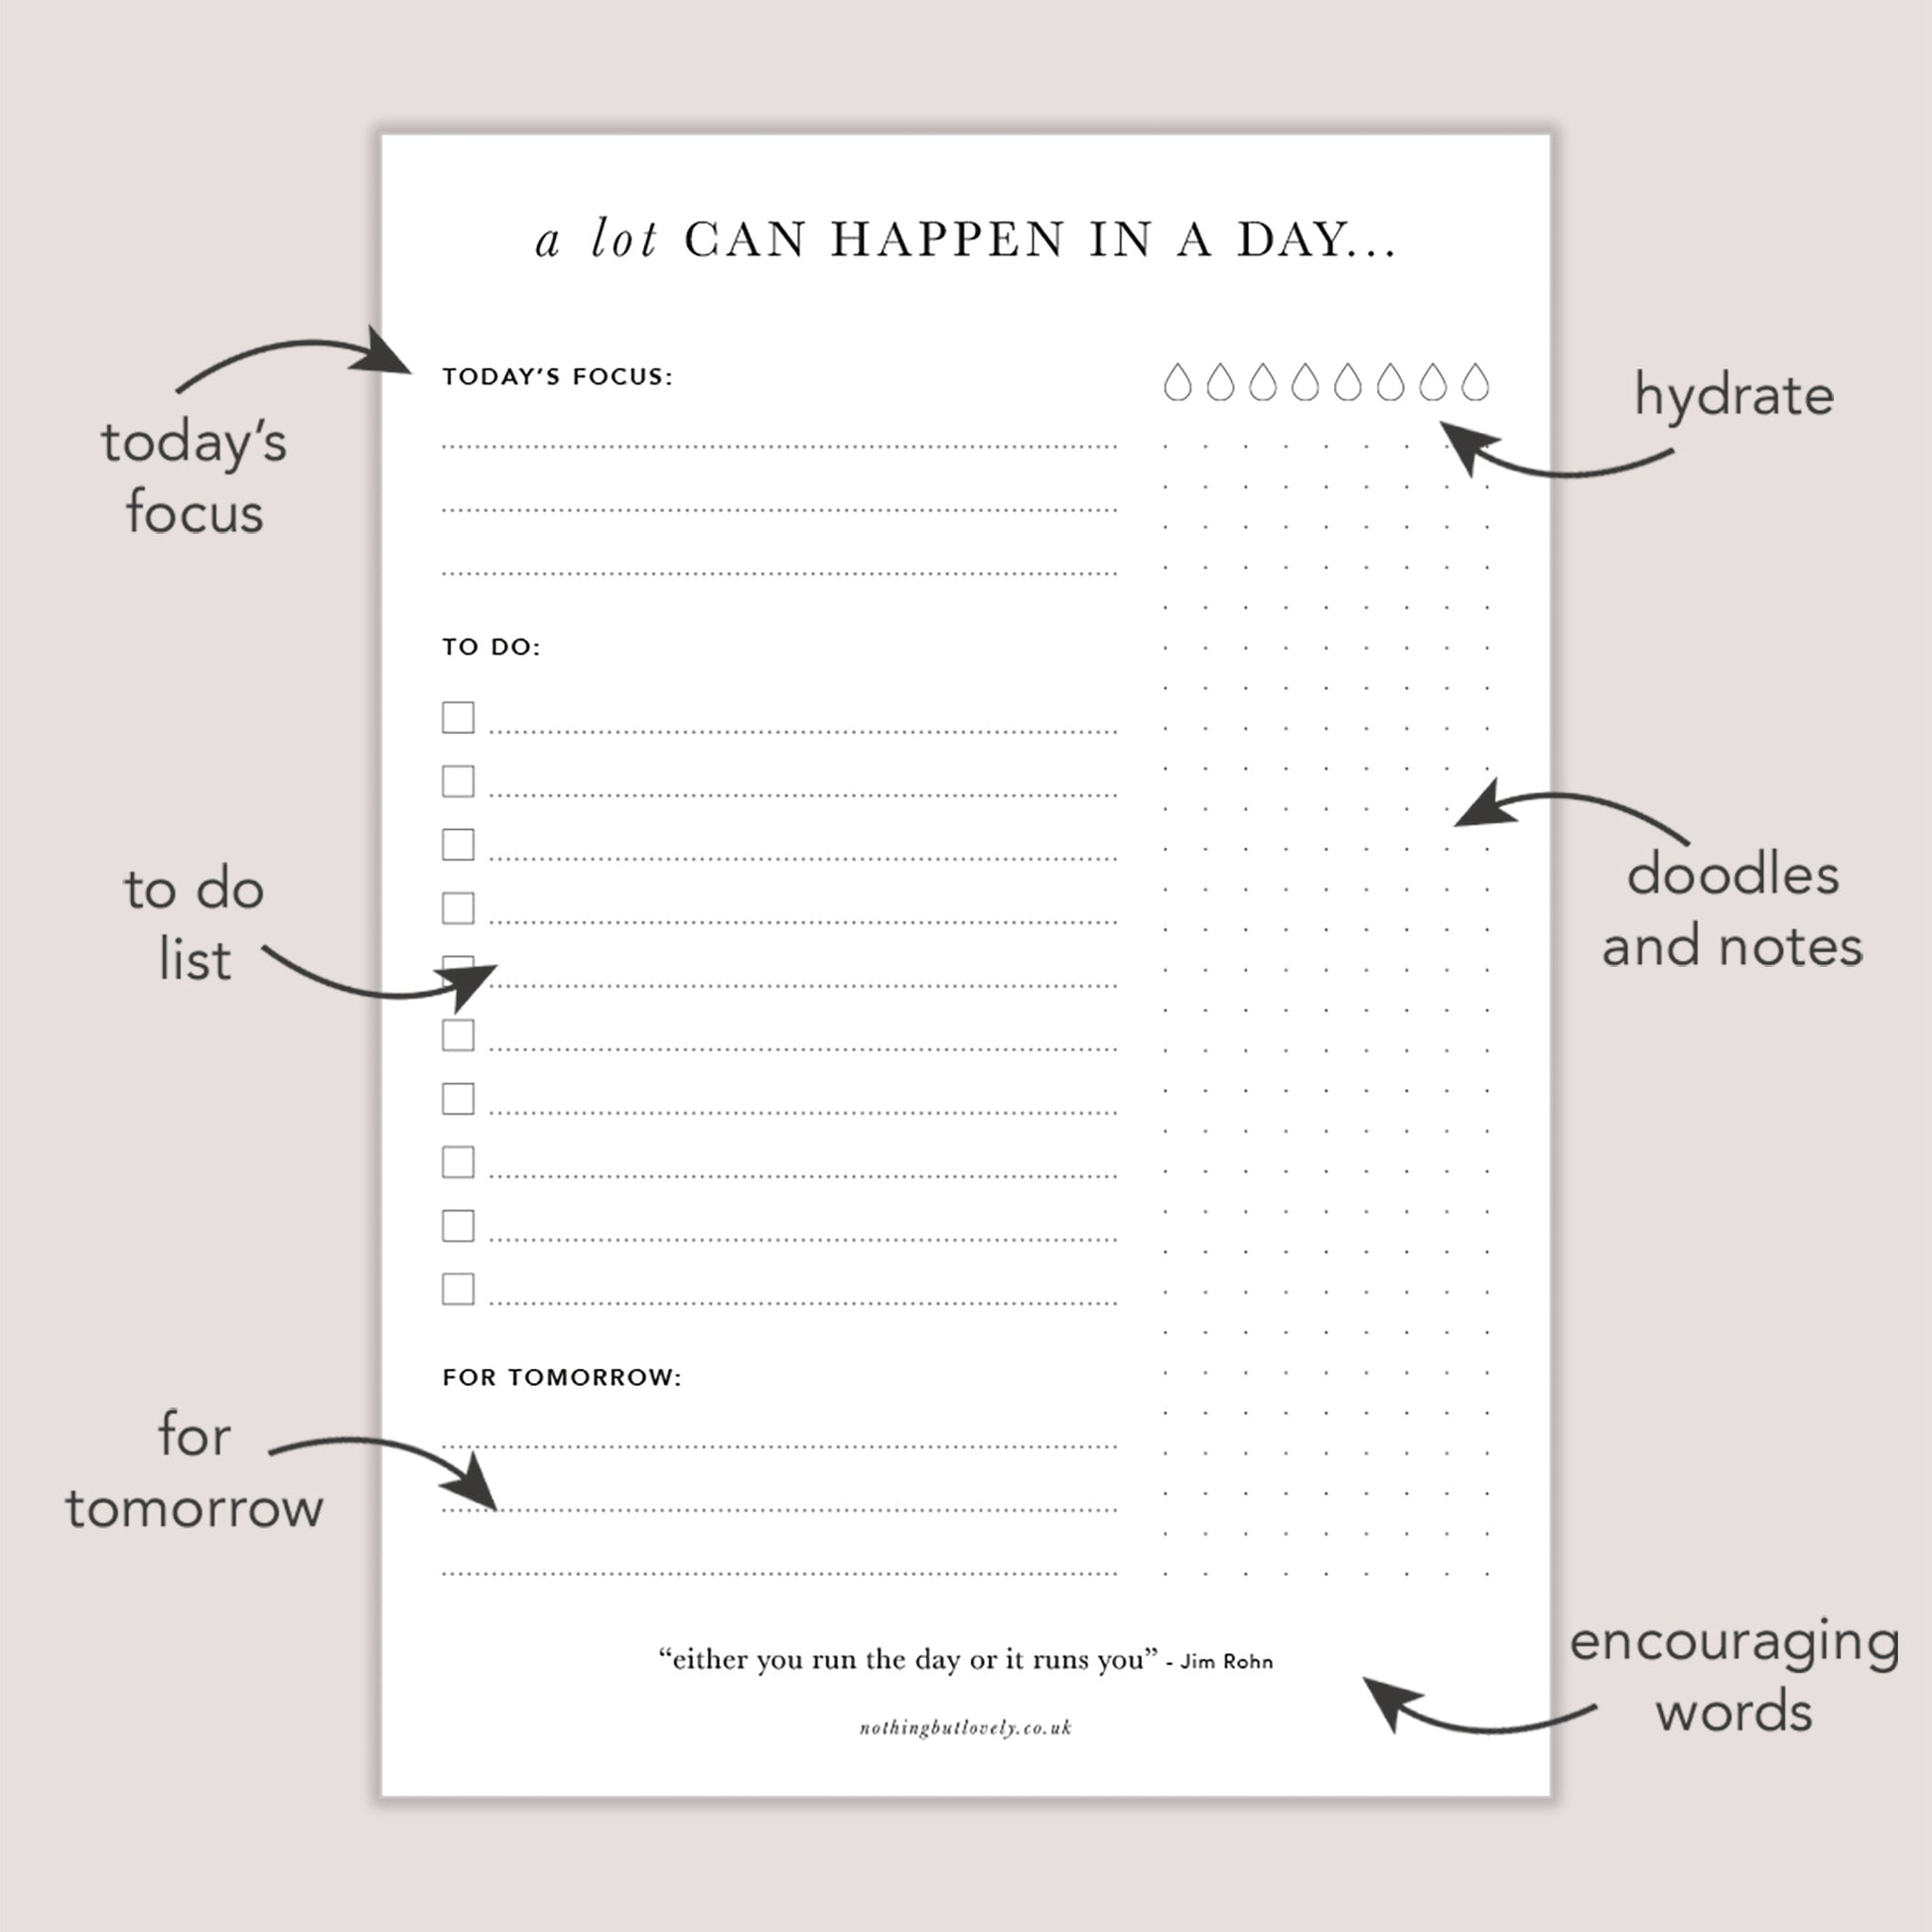 A lot can happen in a day, daily planner pad, with arrows highlighting each section, focus, to do, for tomorrow, hydrate, doodles and notes, encouraging words